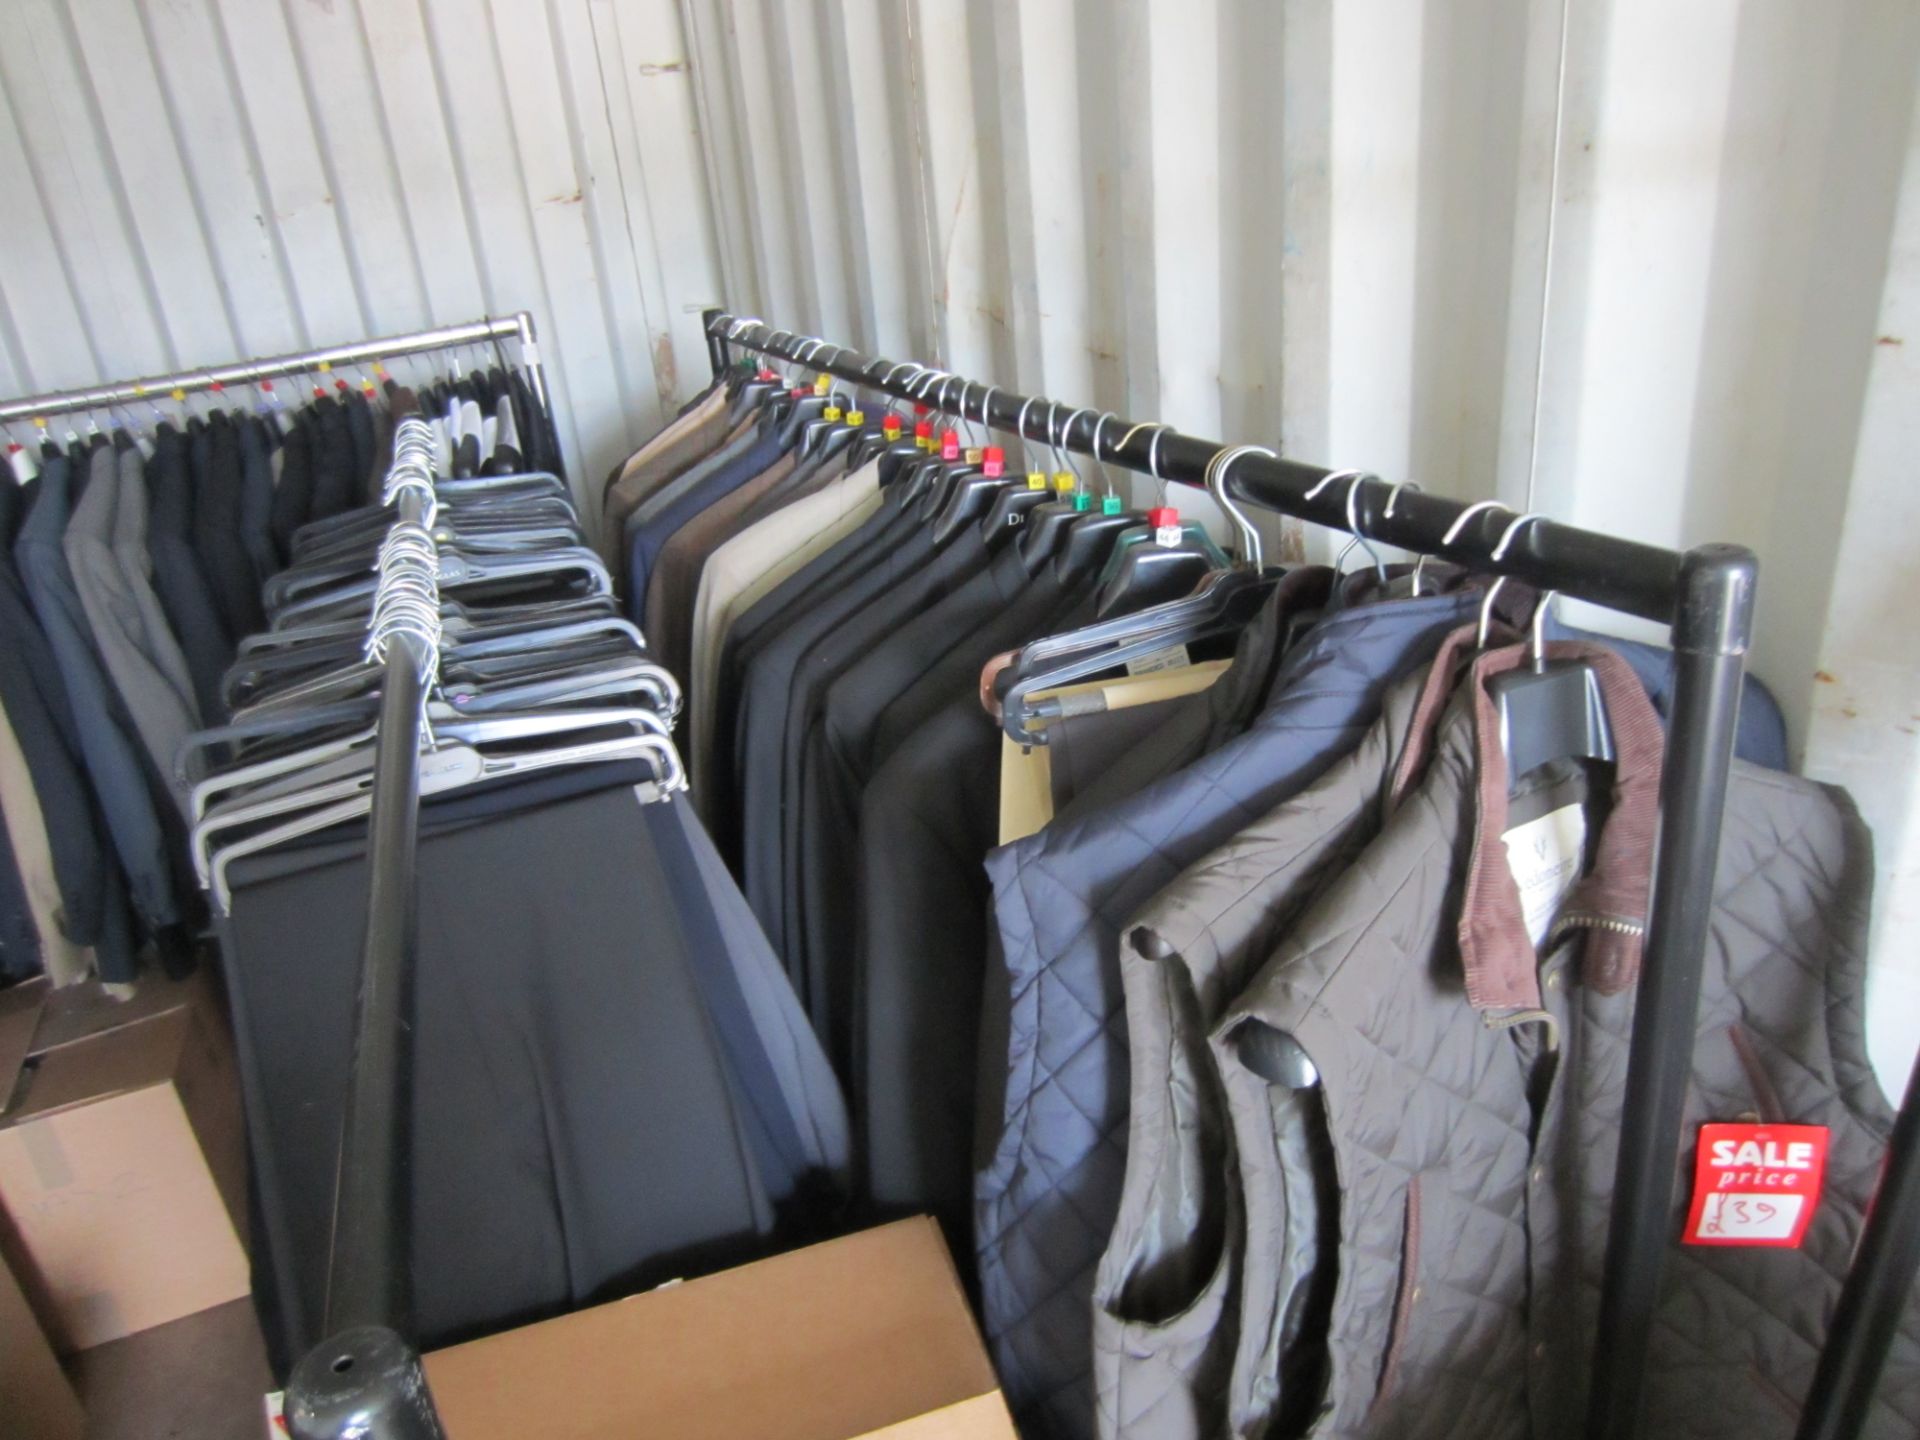 Large Quantity of Stock from a Gents Outfitters, comprising Formal Shirts, Trousers, Ties, Belts - Image 2 of 9